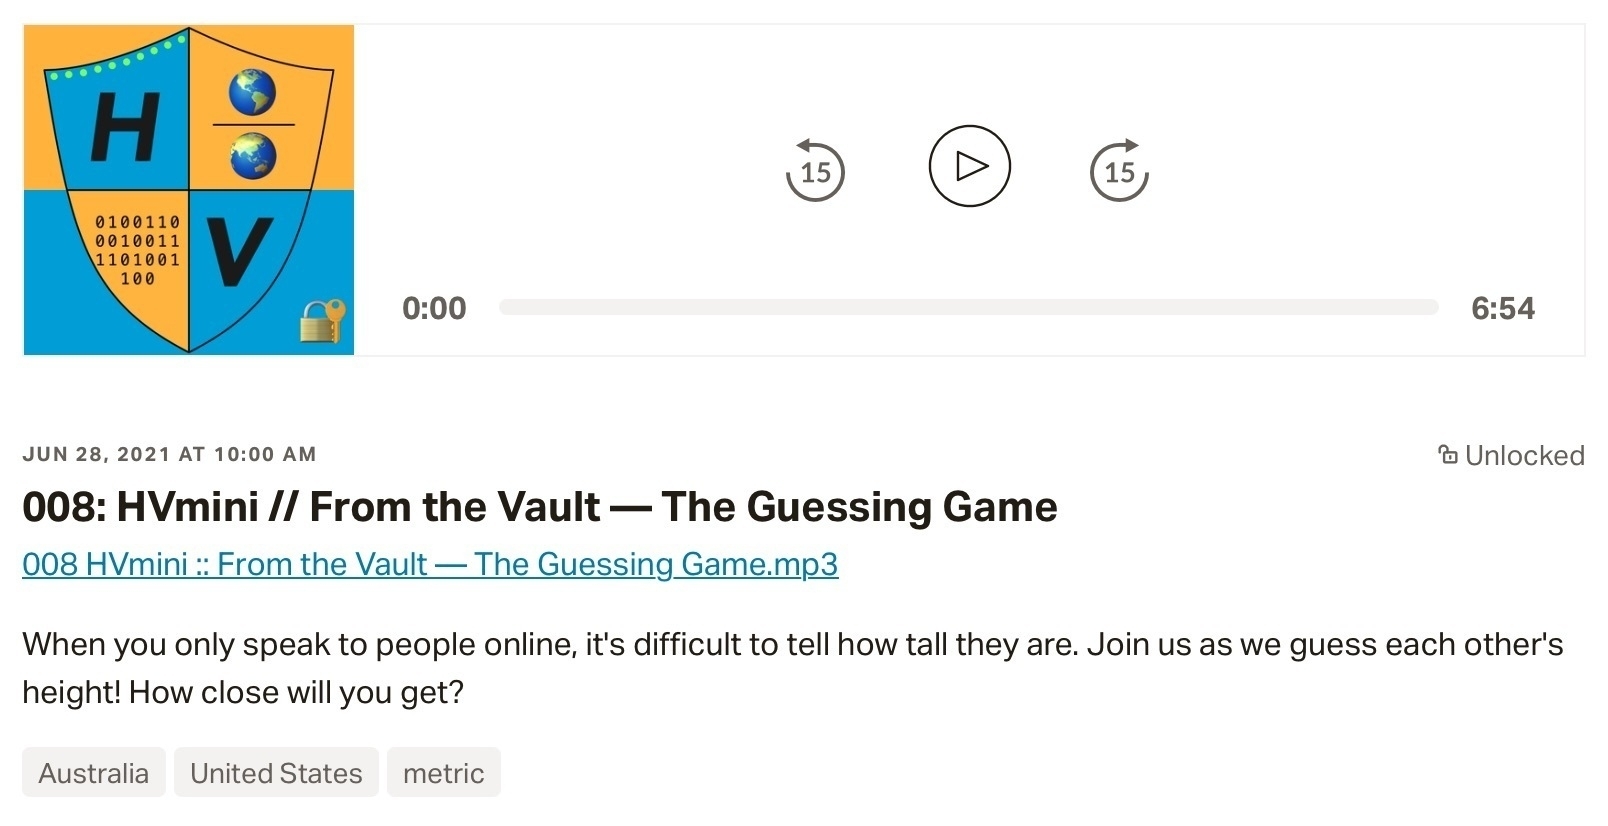 Screenshot of unlocked Patreon audio post with the following description: ‘ 008: HVmini // From the Vault — The Guessing Game: When you only speak to people online, it's difficult to tell how tall they are. Join us as we guess each other's height! How close will you get?’